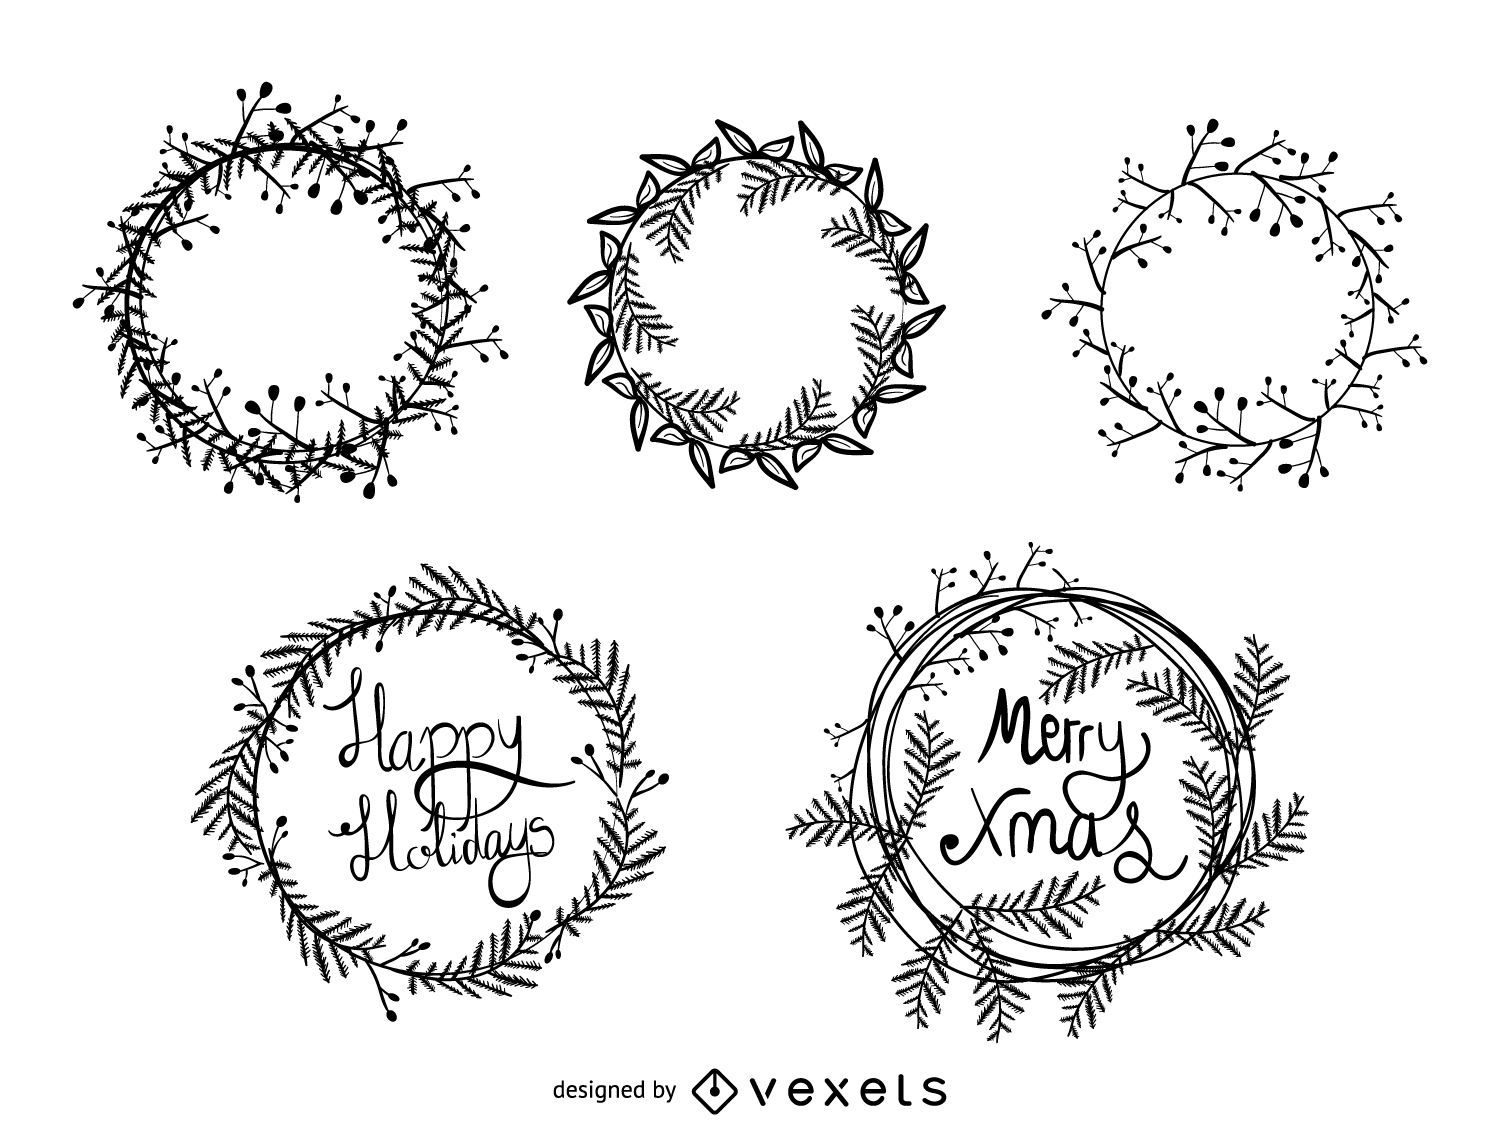 How to Draw a Christmas Wreath - Really Easy Drawing Tutorial